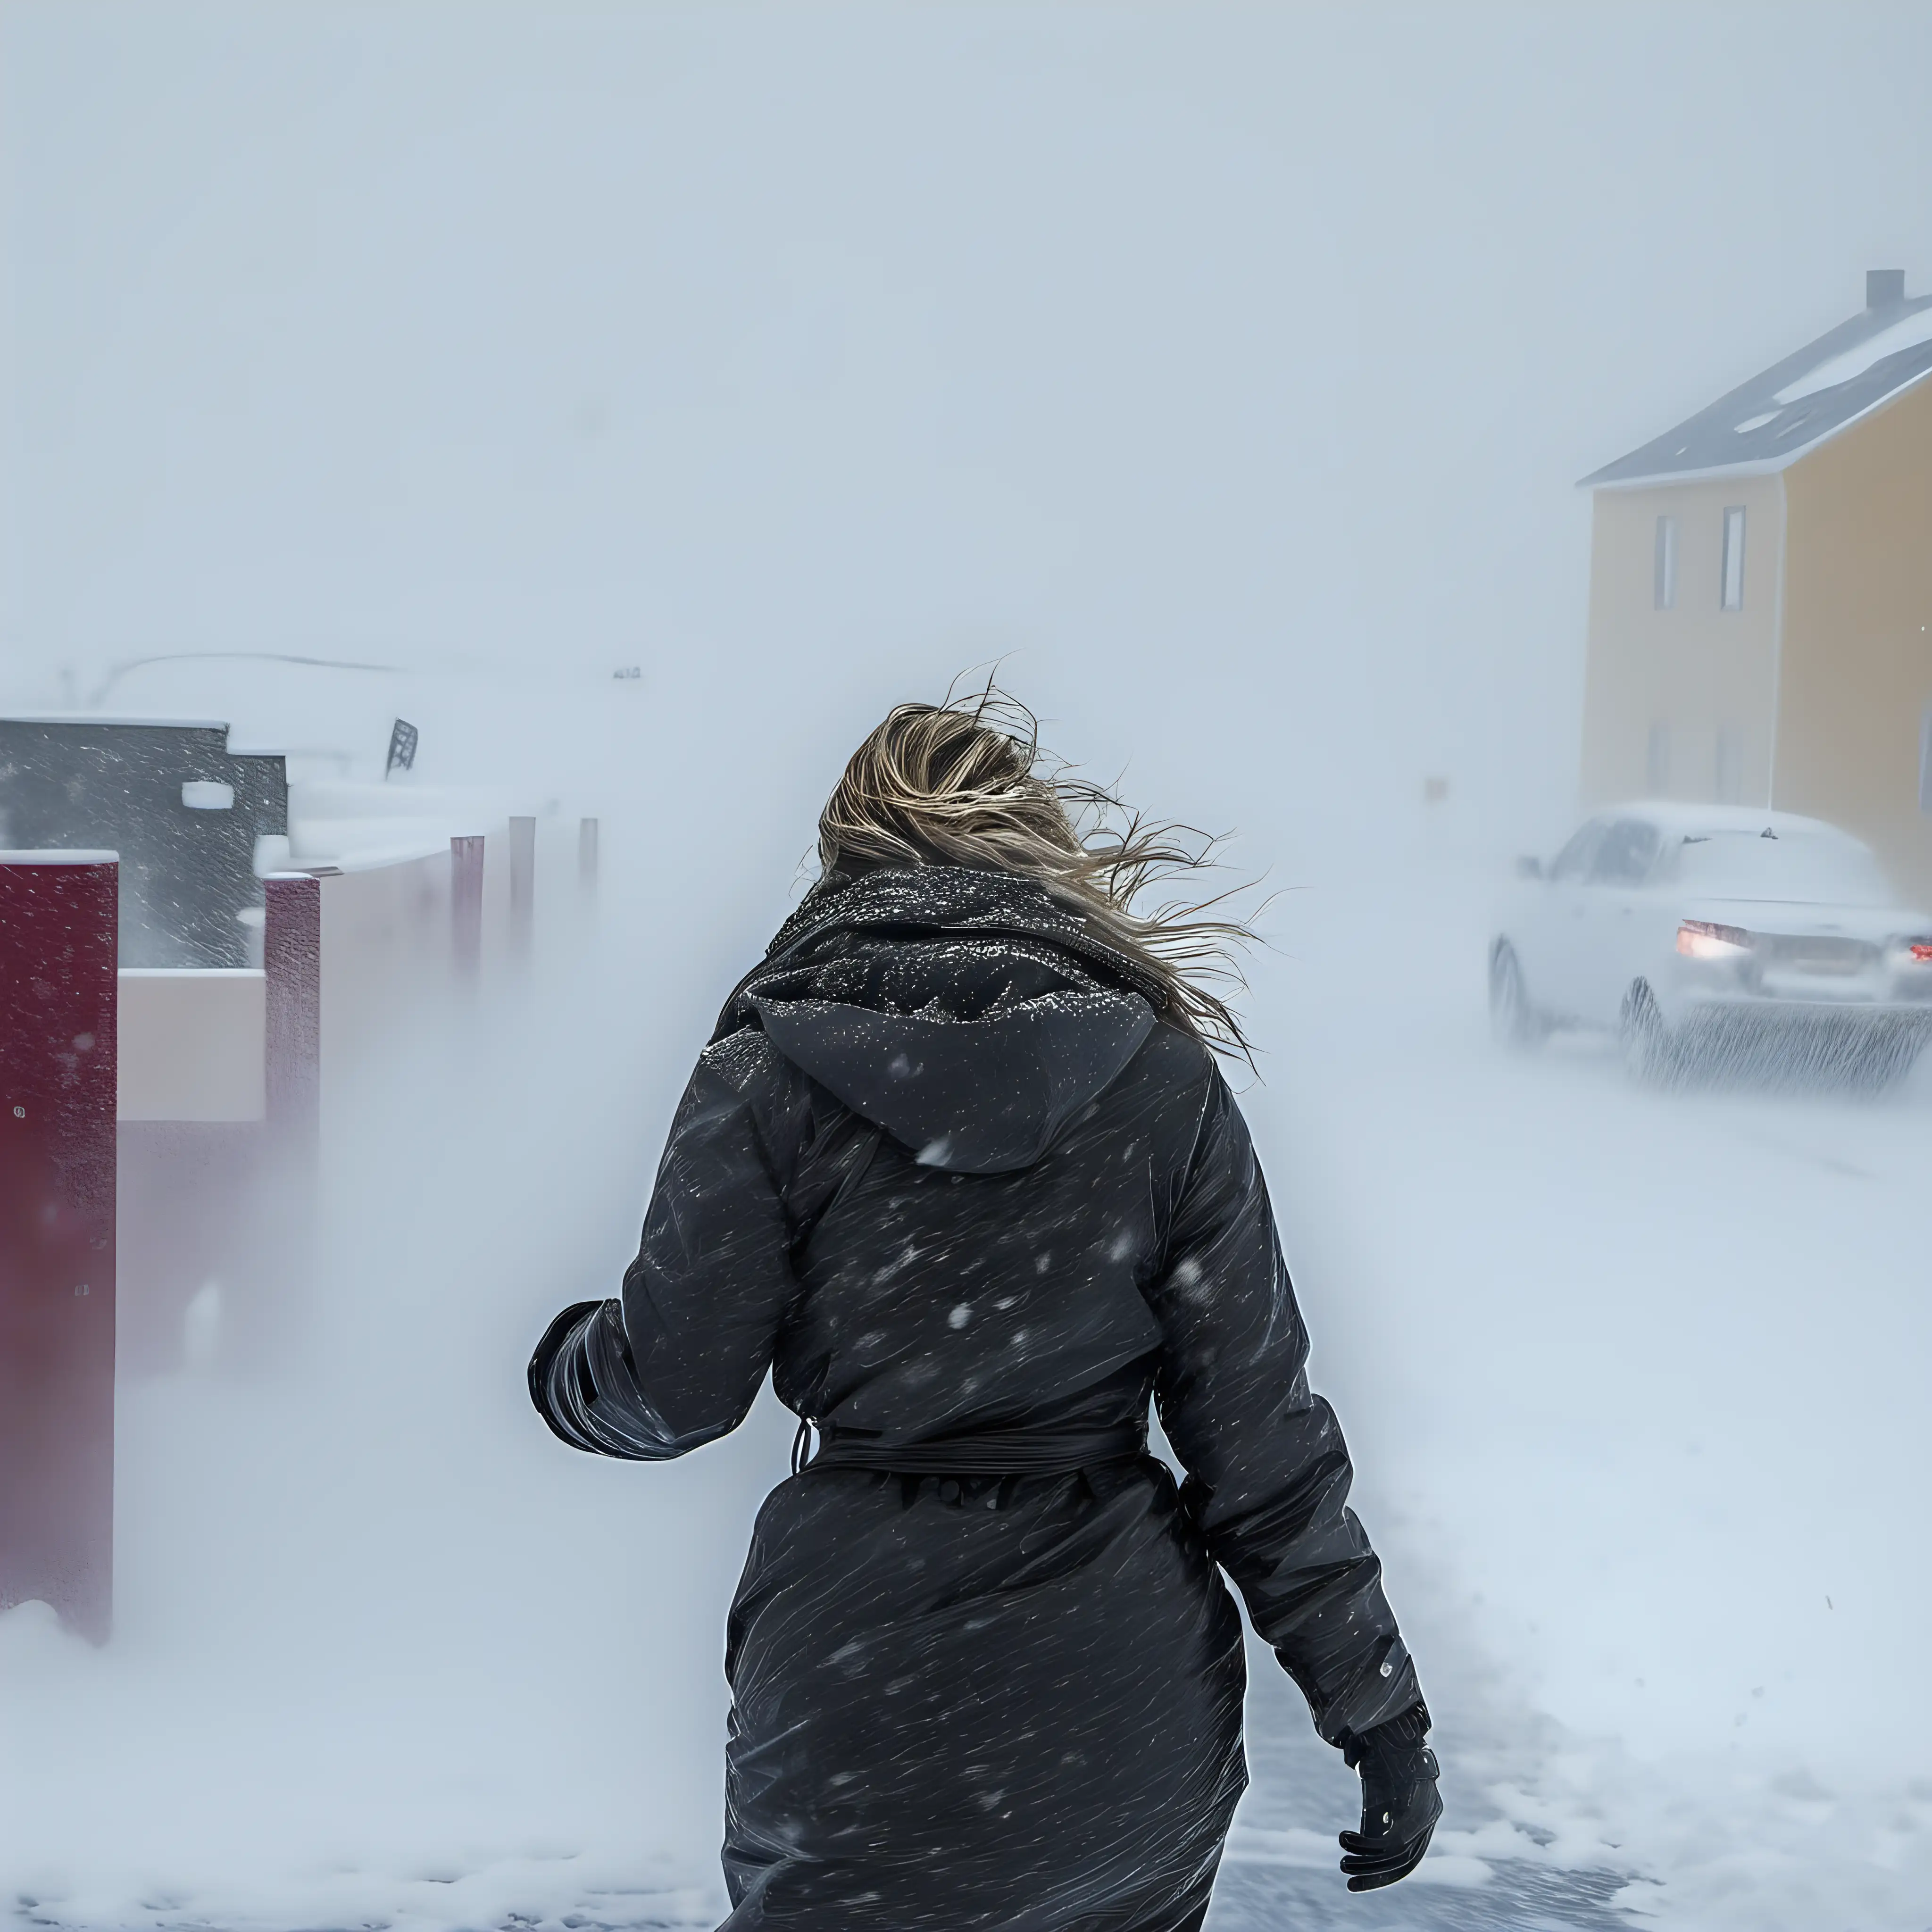 Intense Snowstorm in Isafjordur Woman Braving the Winter Blizzard